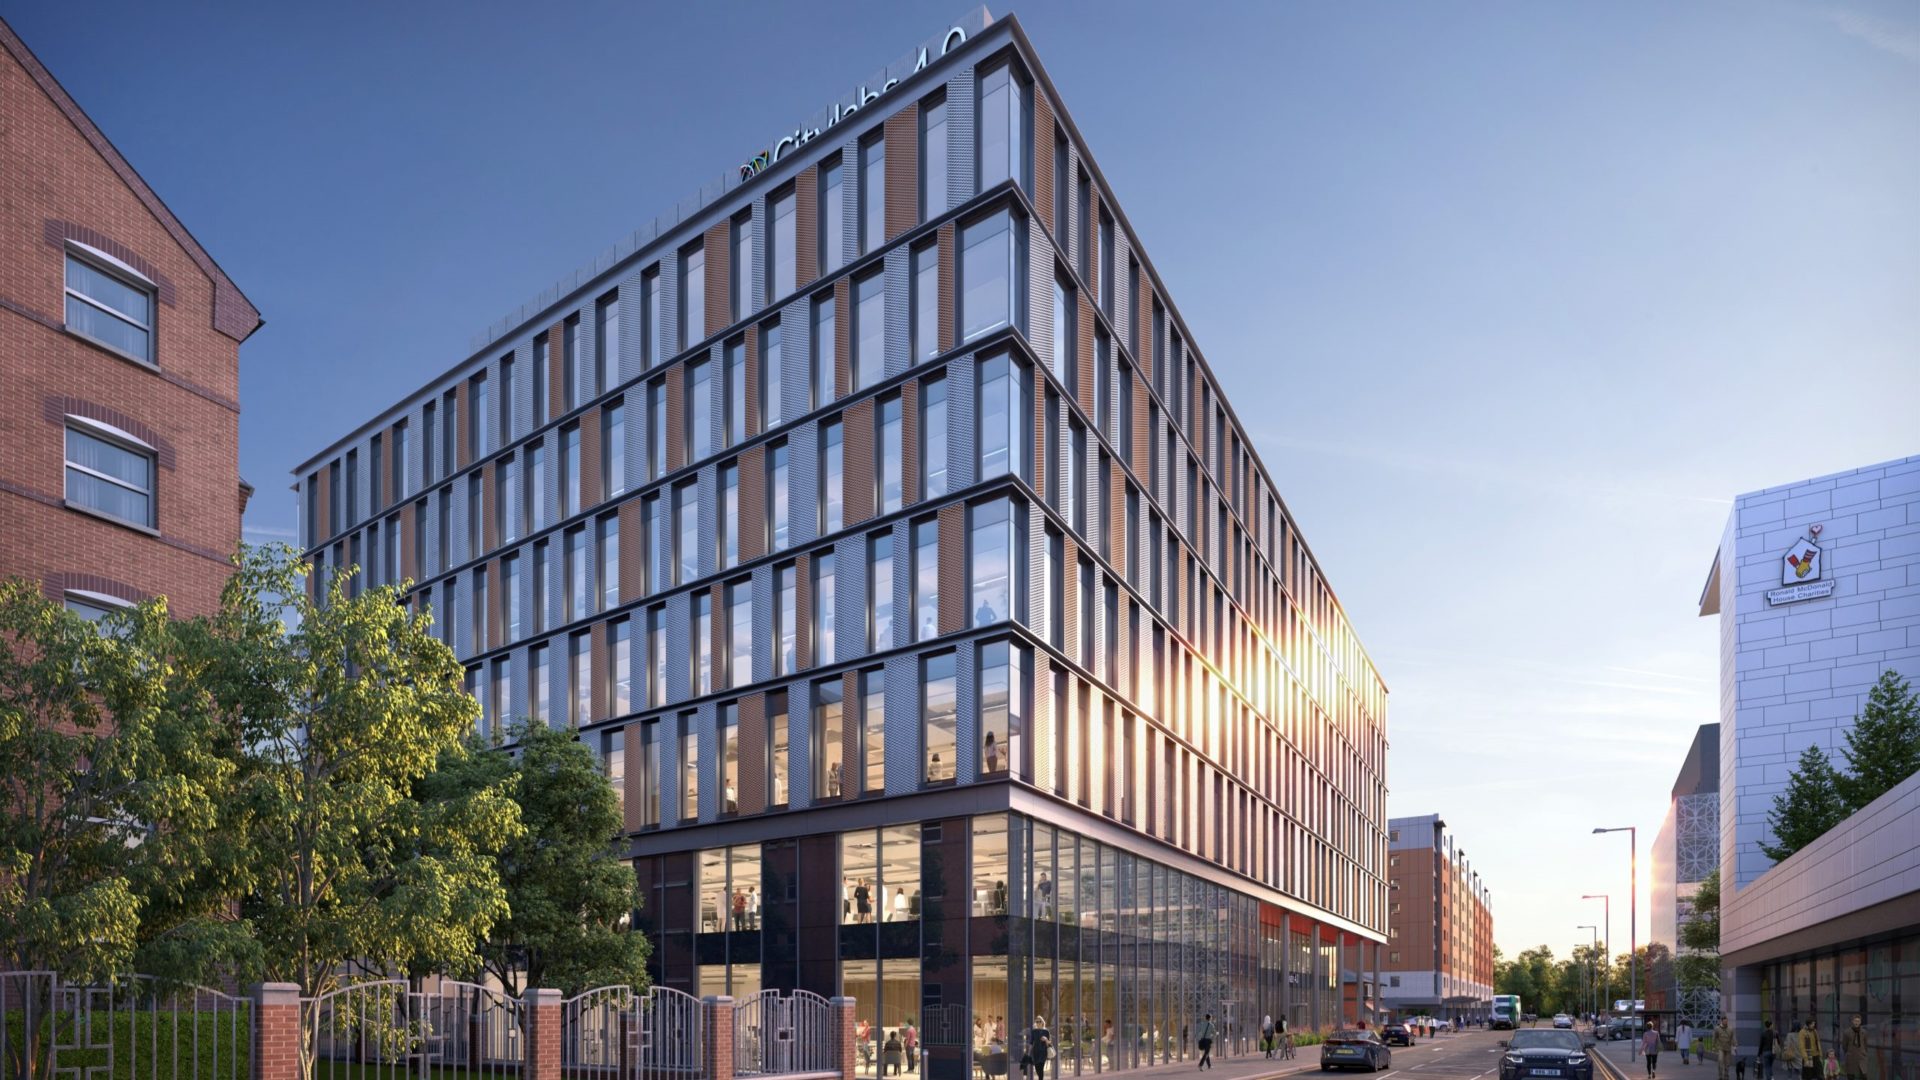 Planned-expansion-of-Manchester-health-innovation-campus-Citylab-image-MFT